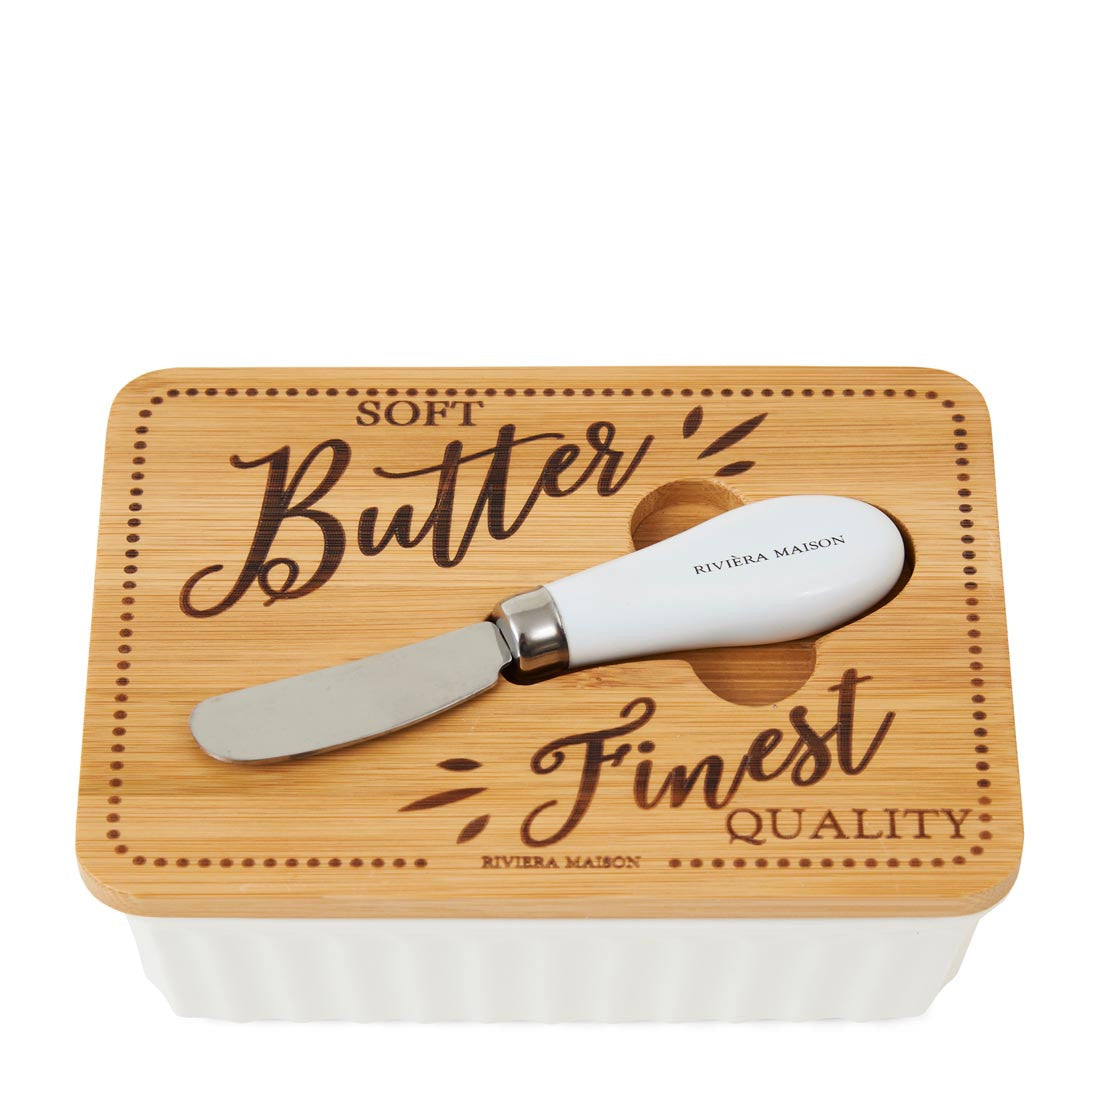 Finest Quality Butter Dish